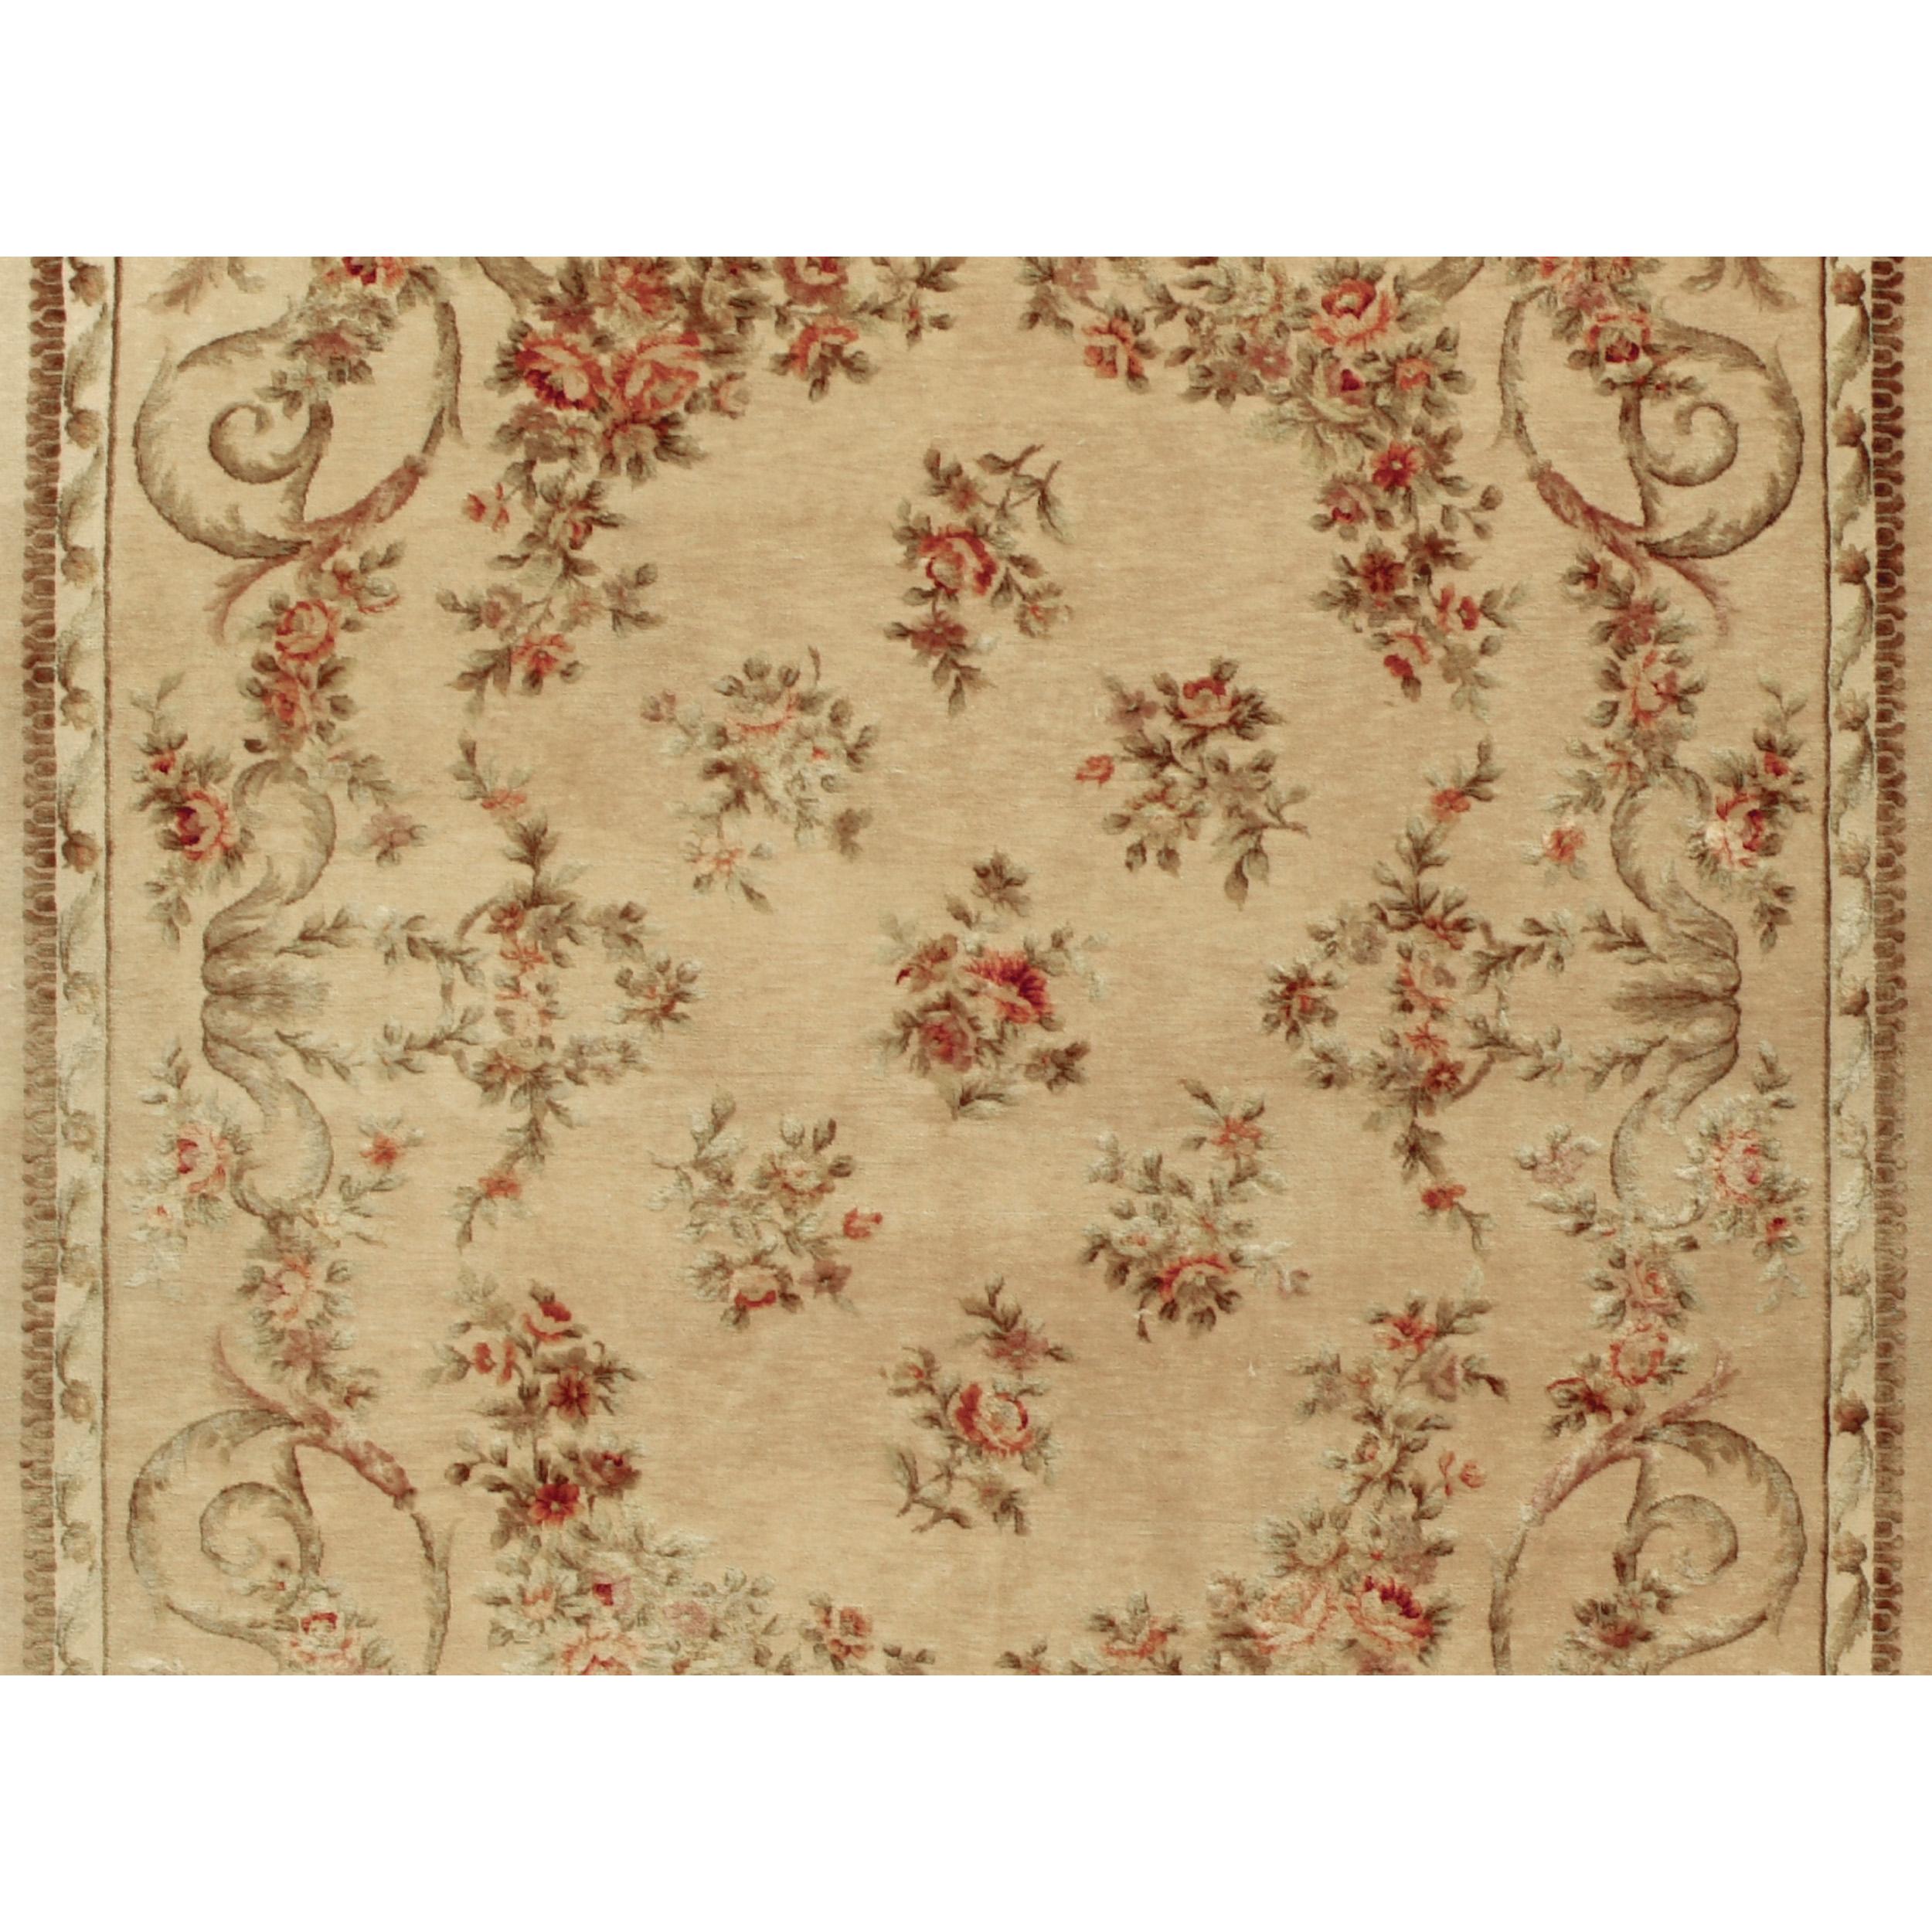 Luxury European Hand-Knotted Shenandoah Birch 10x14 Rug In New Condition For Sale In Secaucus, NJ